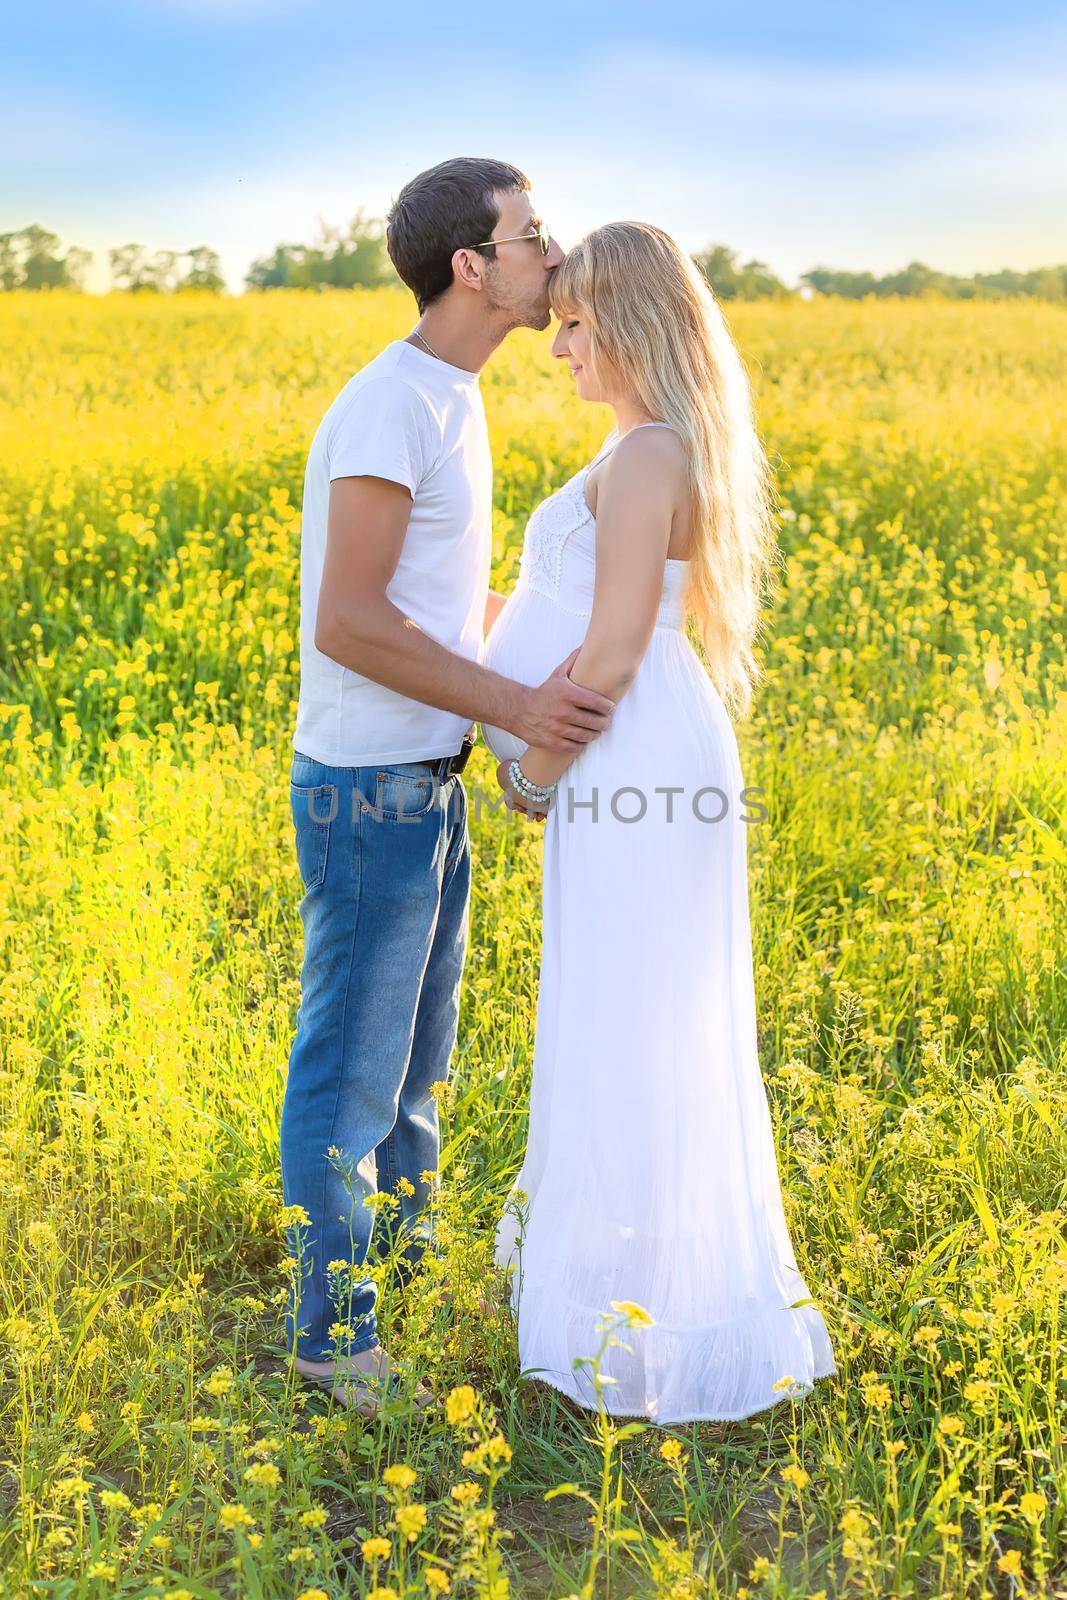 Pregnant woman and man photo shoot in mustard field. Selective focus.